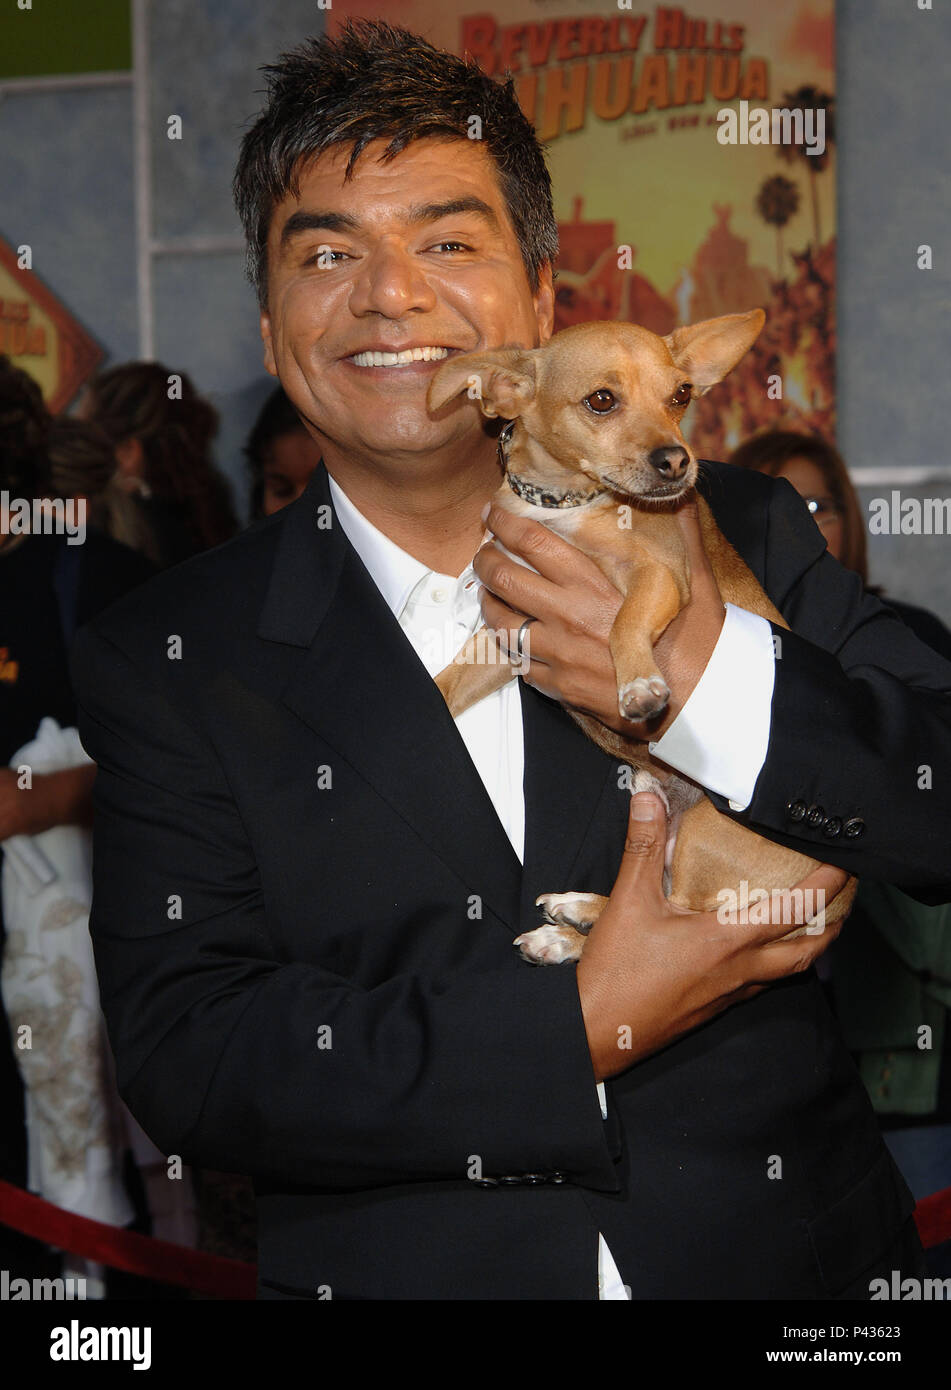 George Lopez Posing The Chihuahua Beverly Hills Chihuahua Premiere At The El Capitan Theatre In Los Angeles Posing With The Chihuahua Three Quarters Smile 03 Lopezgeorge 03 Jpg03 Lopezgeorge 03 Event - beverly hills chihuahuas chihuahua full song roblox id